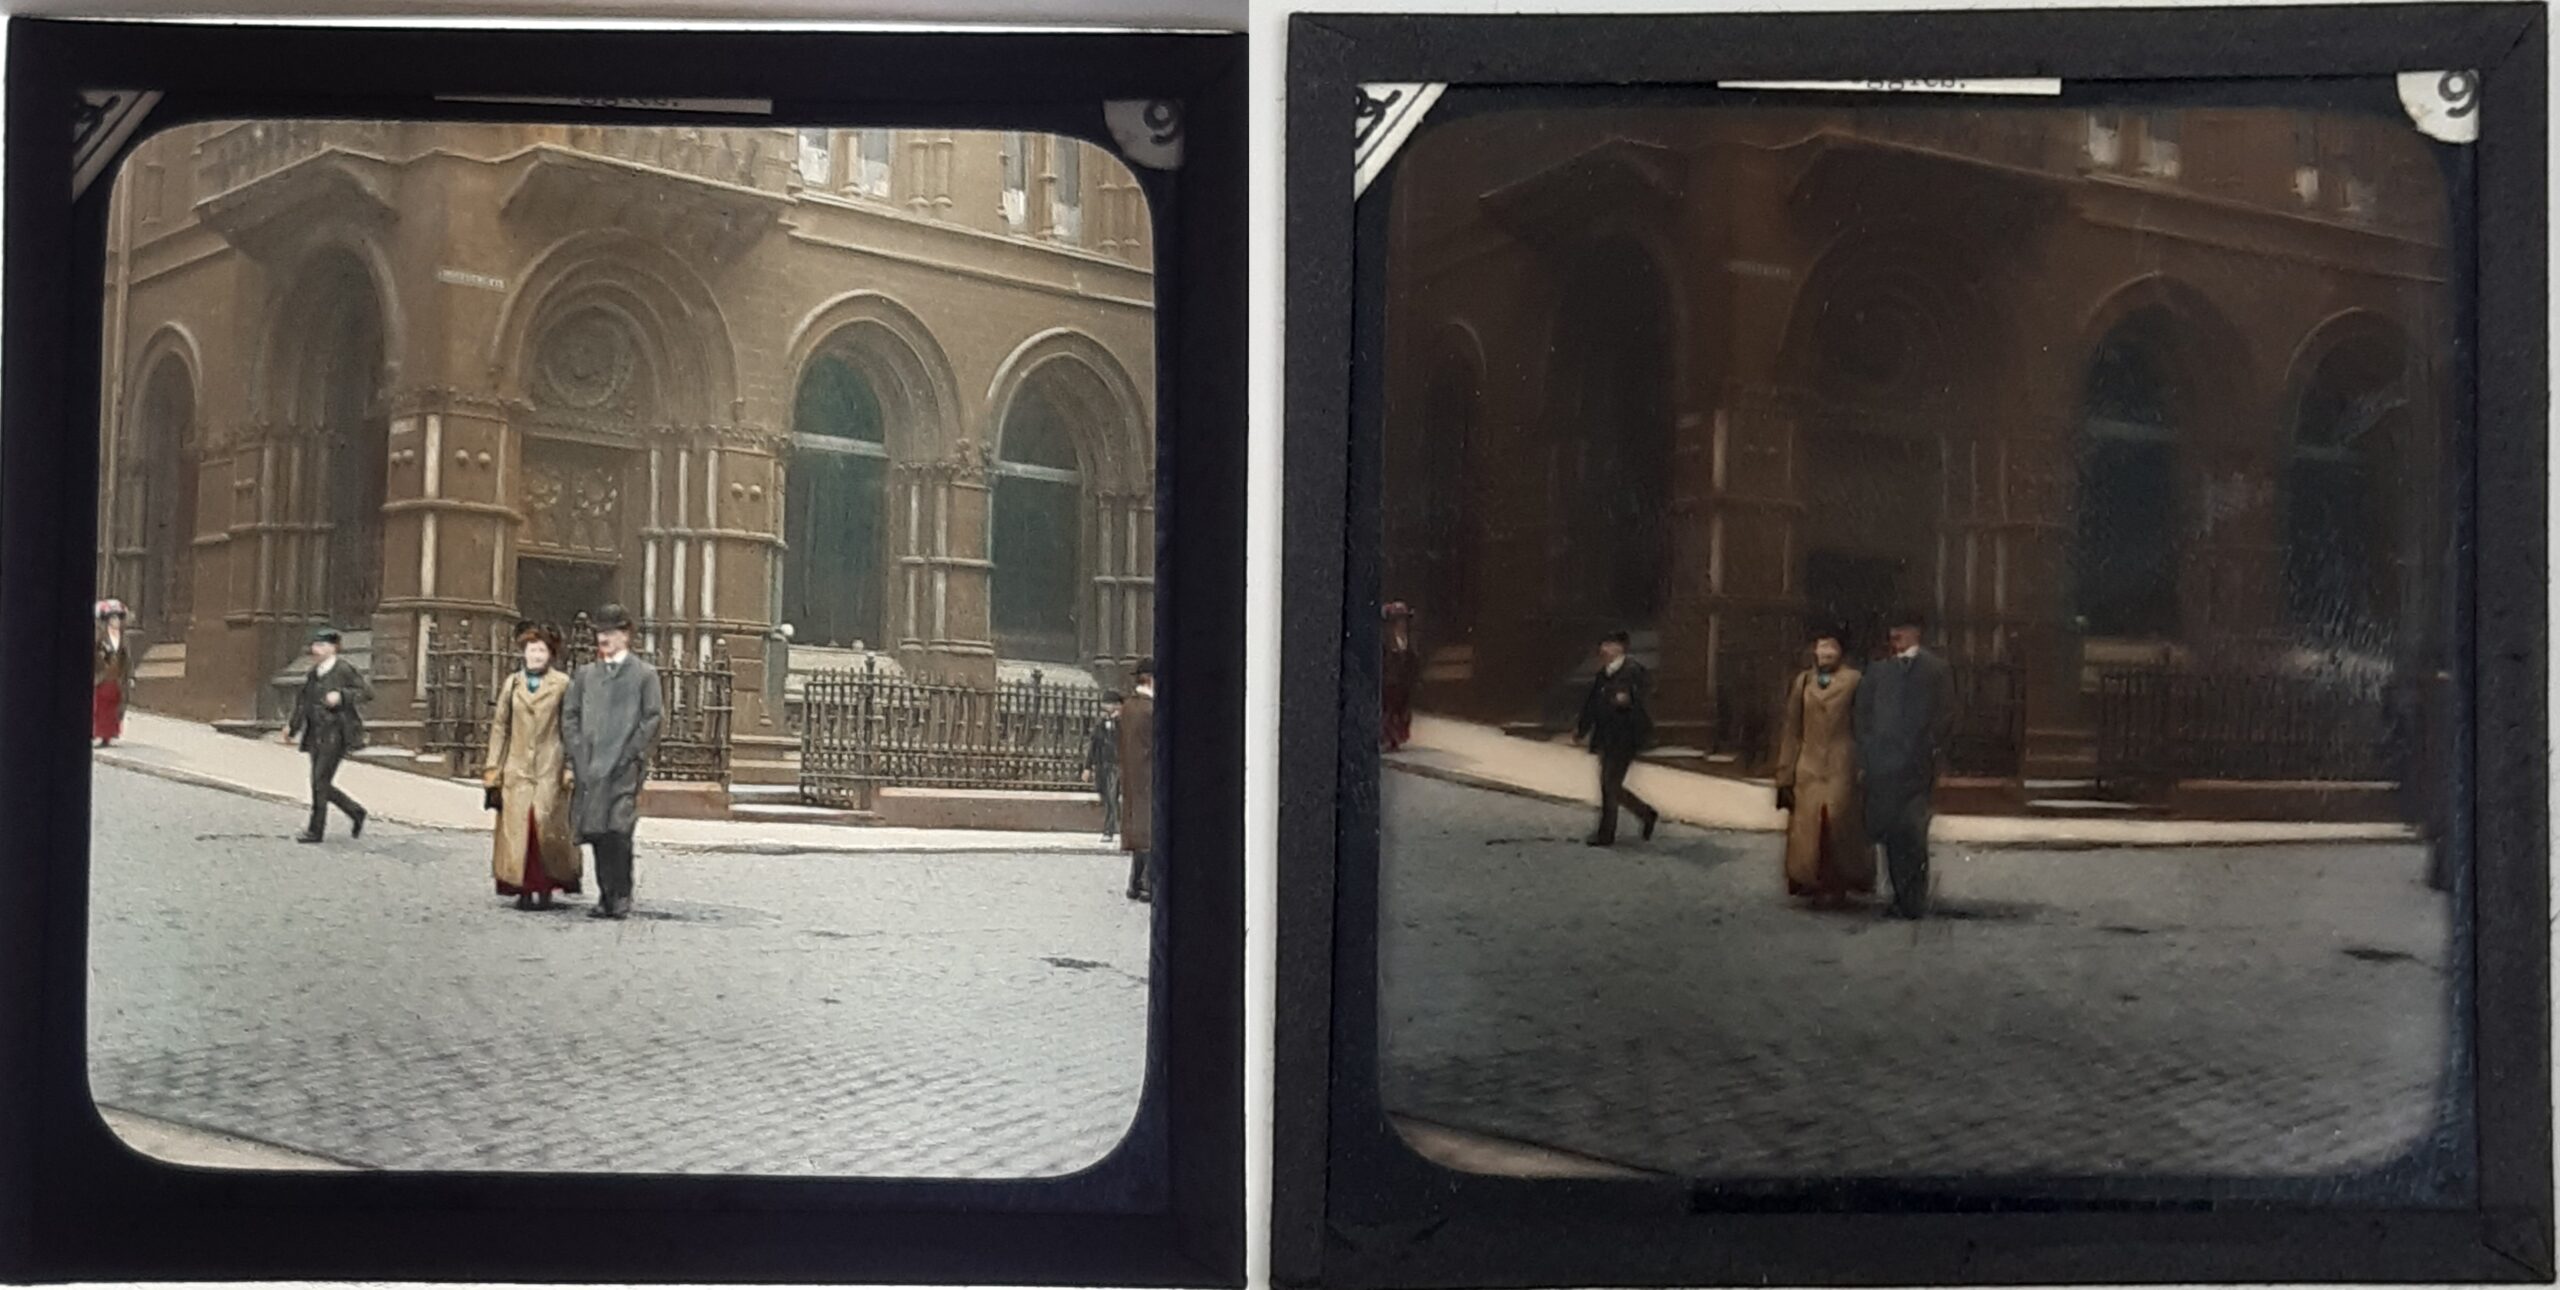 The same Bradford street scene twice. The left image is crisp and bright whereas the right is darker and blurrier.